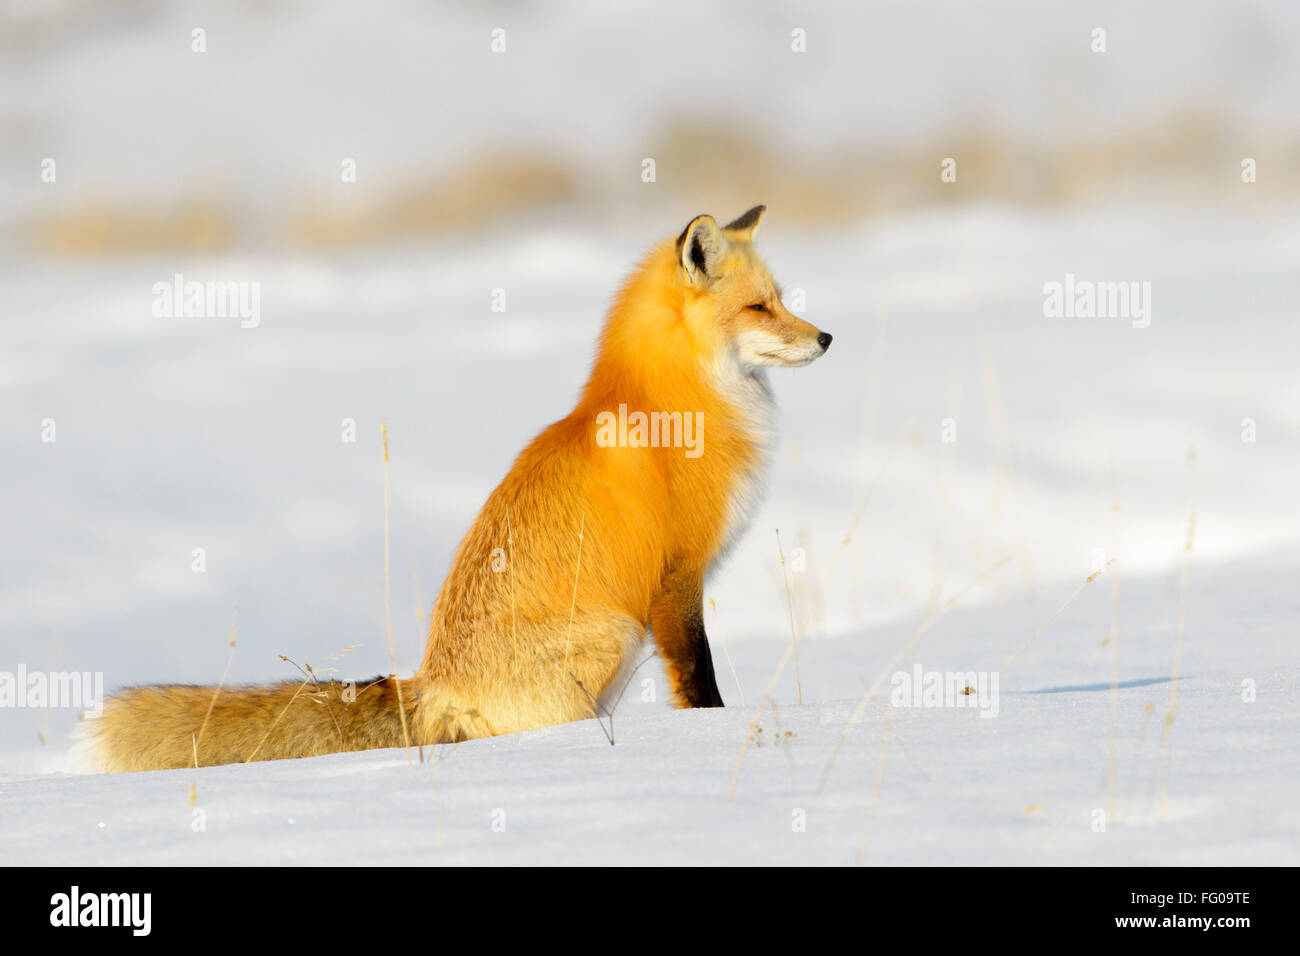 American Red Fox (Vulpes vulpes fulva) adult, sitting in snow, Yellowstone national park, Wyoming, USA. Stock Photo